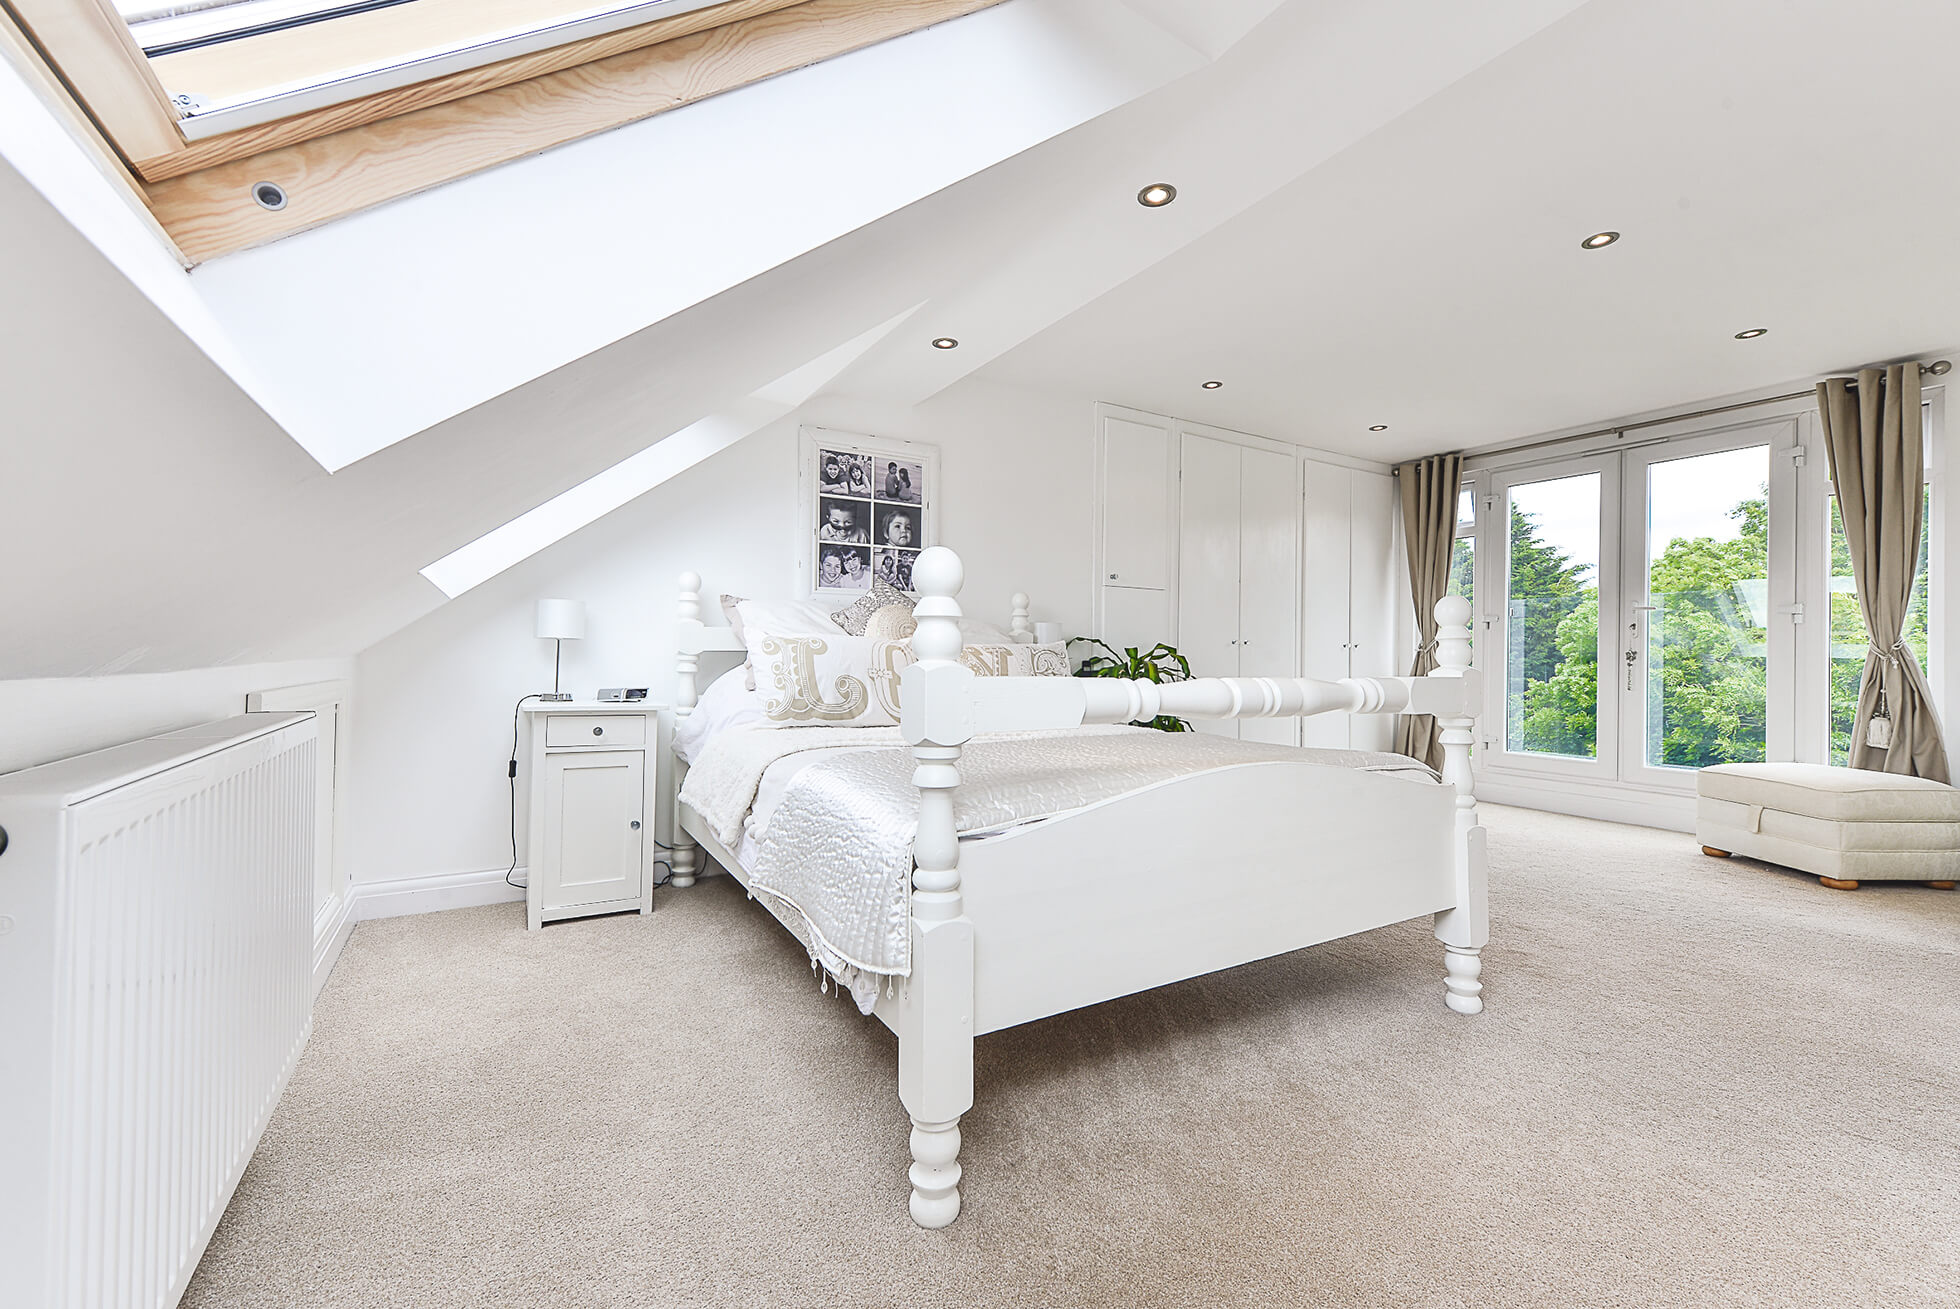 Do you have a question about converting your Loft in Napsbury? Here are the most popular questions asked by our clients.